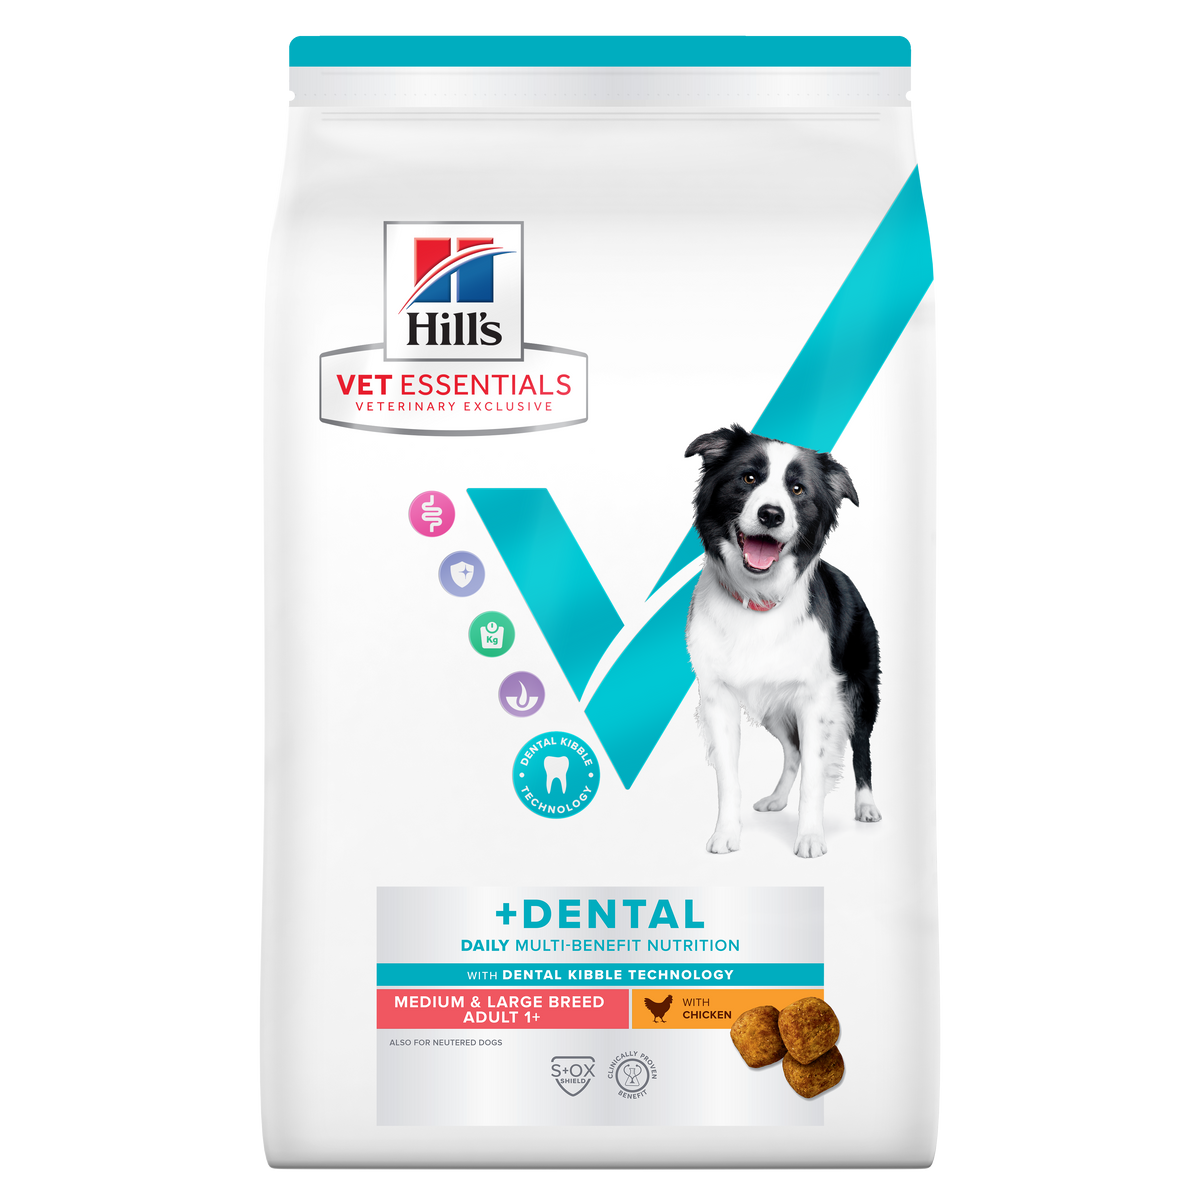 Hill's VET ESSENTIALS MULTI-BENEFIT + DENTAL Adult 1+ Medium and Large Breed Dry Dog Food with Chicken